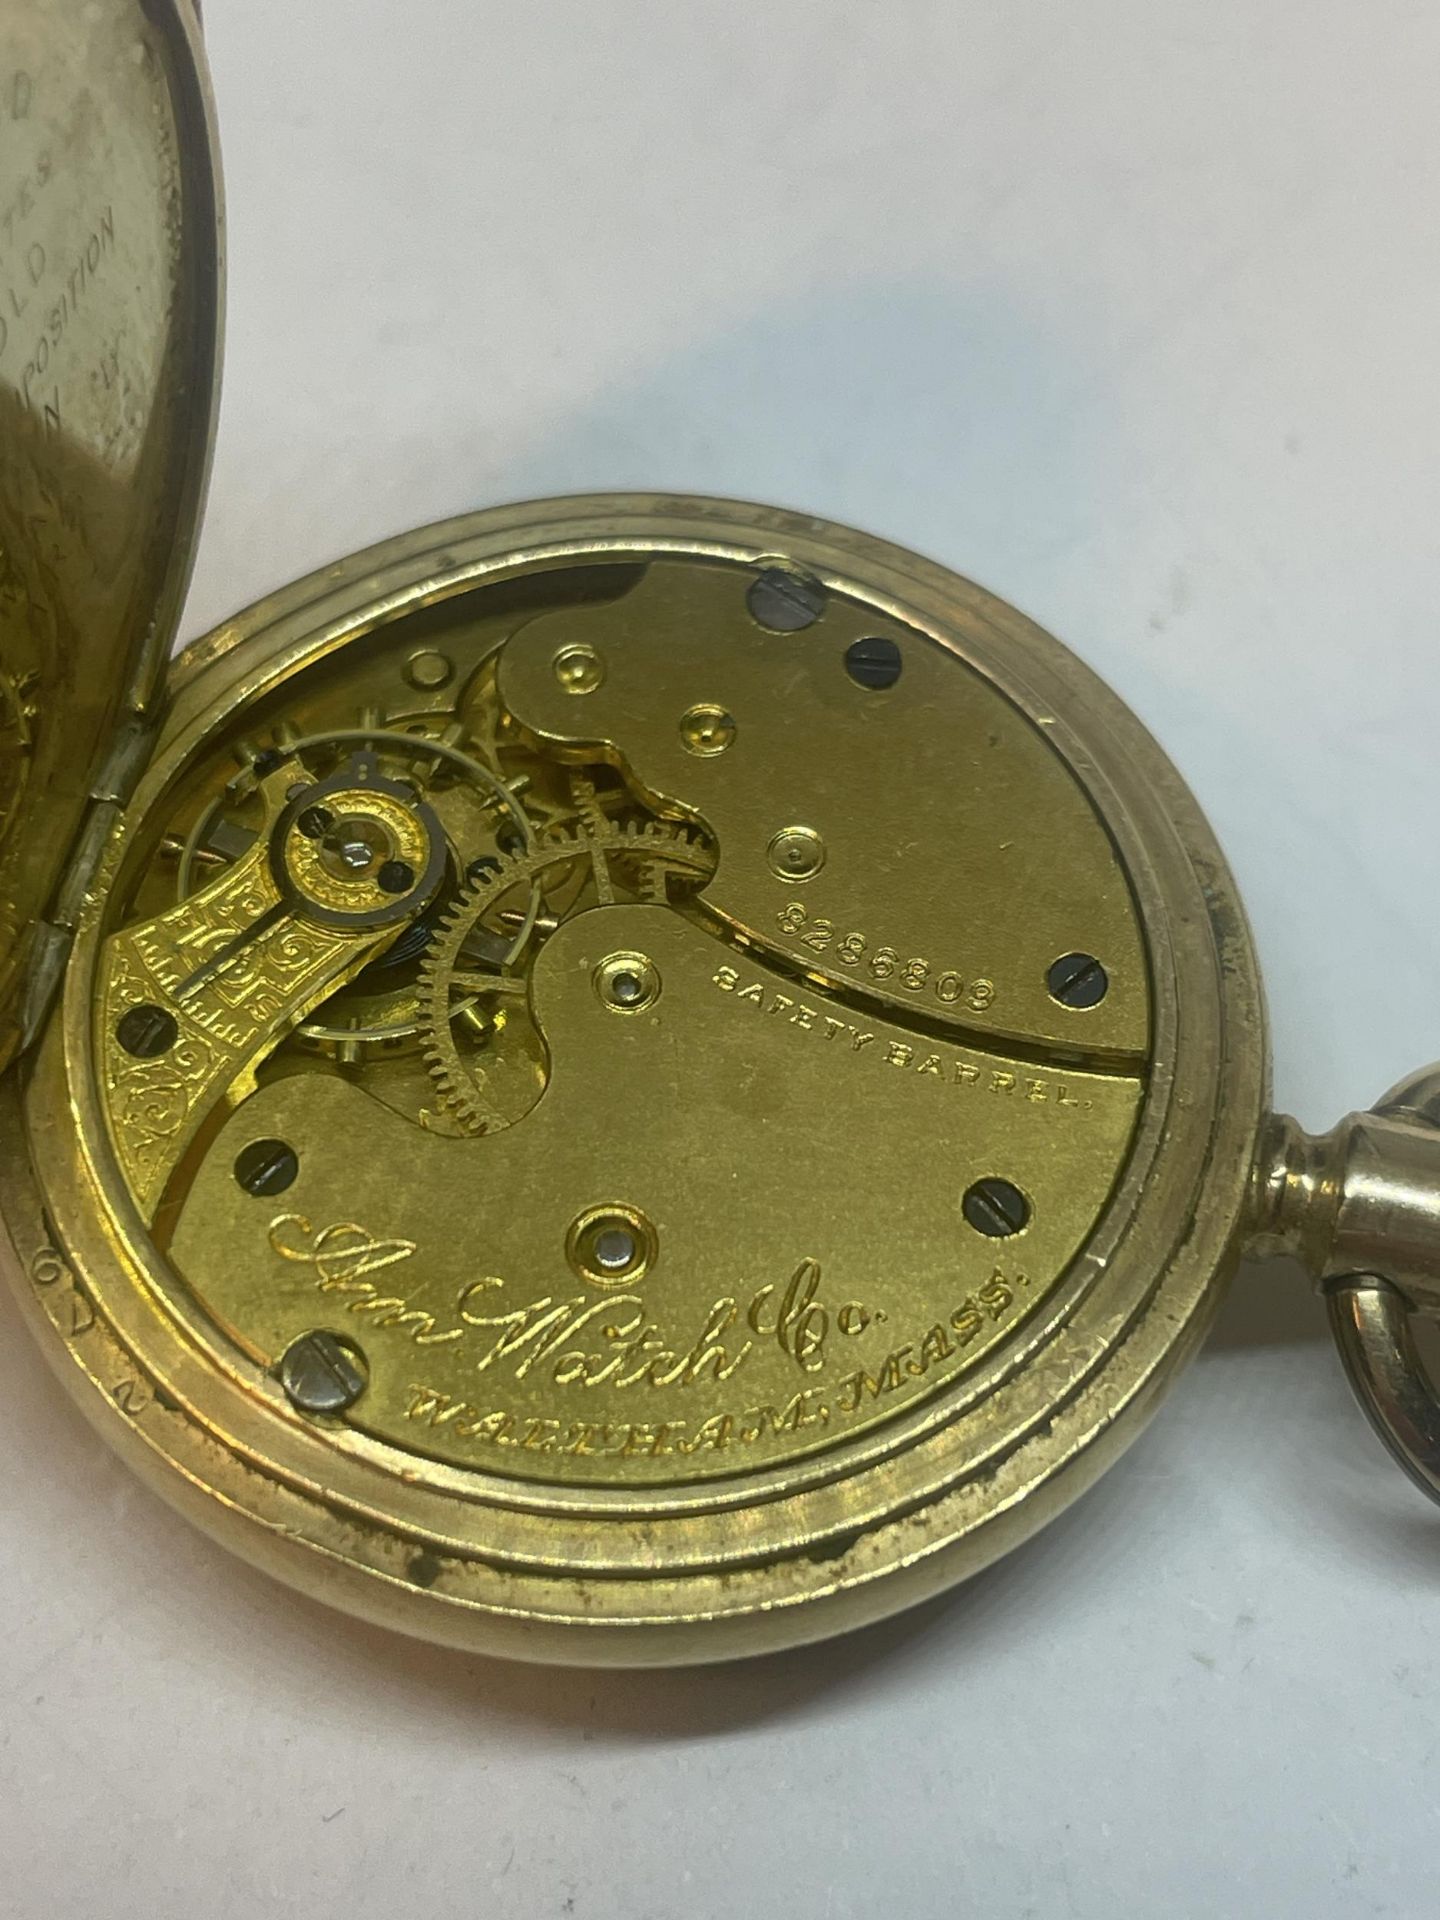 A 14CT GOLD LADIES OPEN FACED POCKET WATCH GROSS WEIGHT 40.20 GRAMS - Image 7 of 8